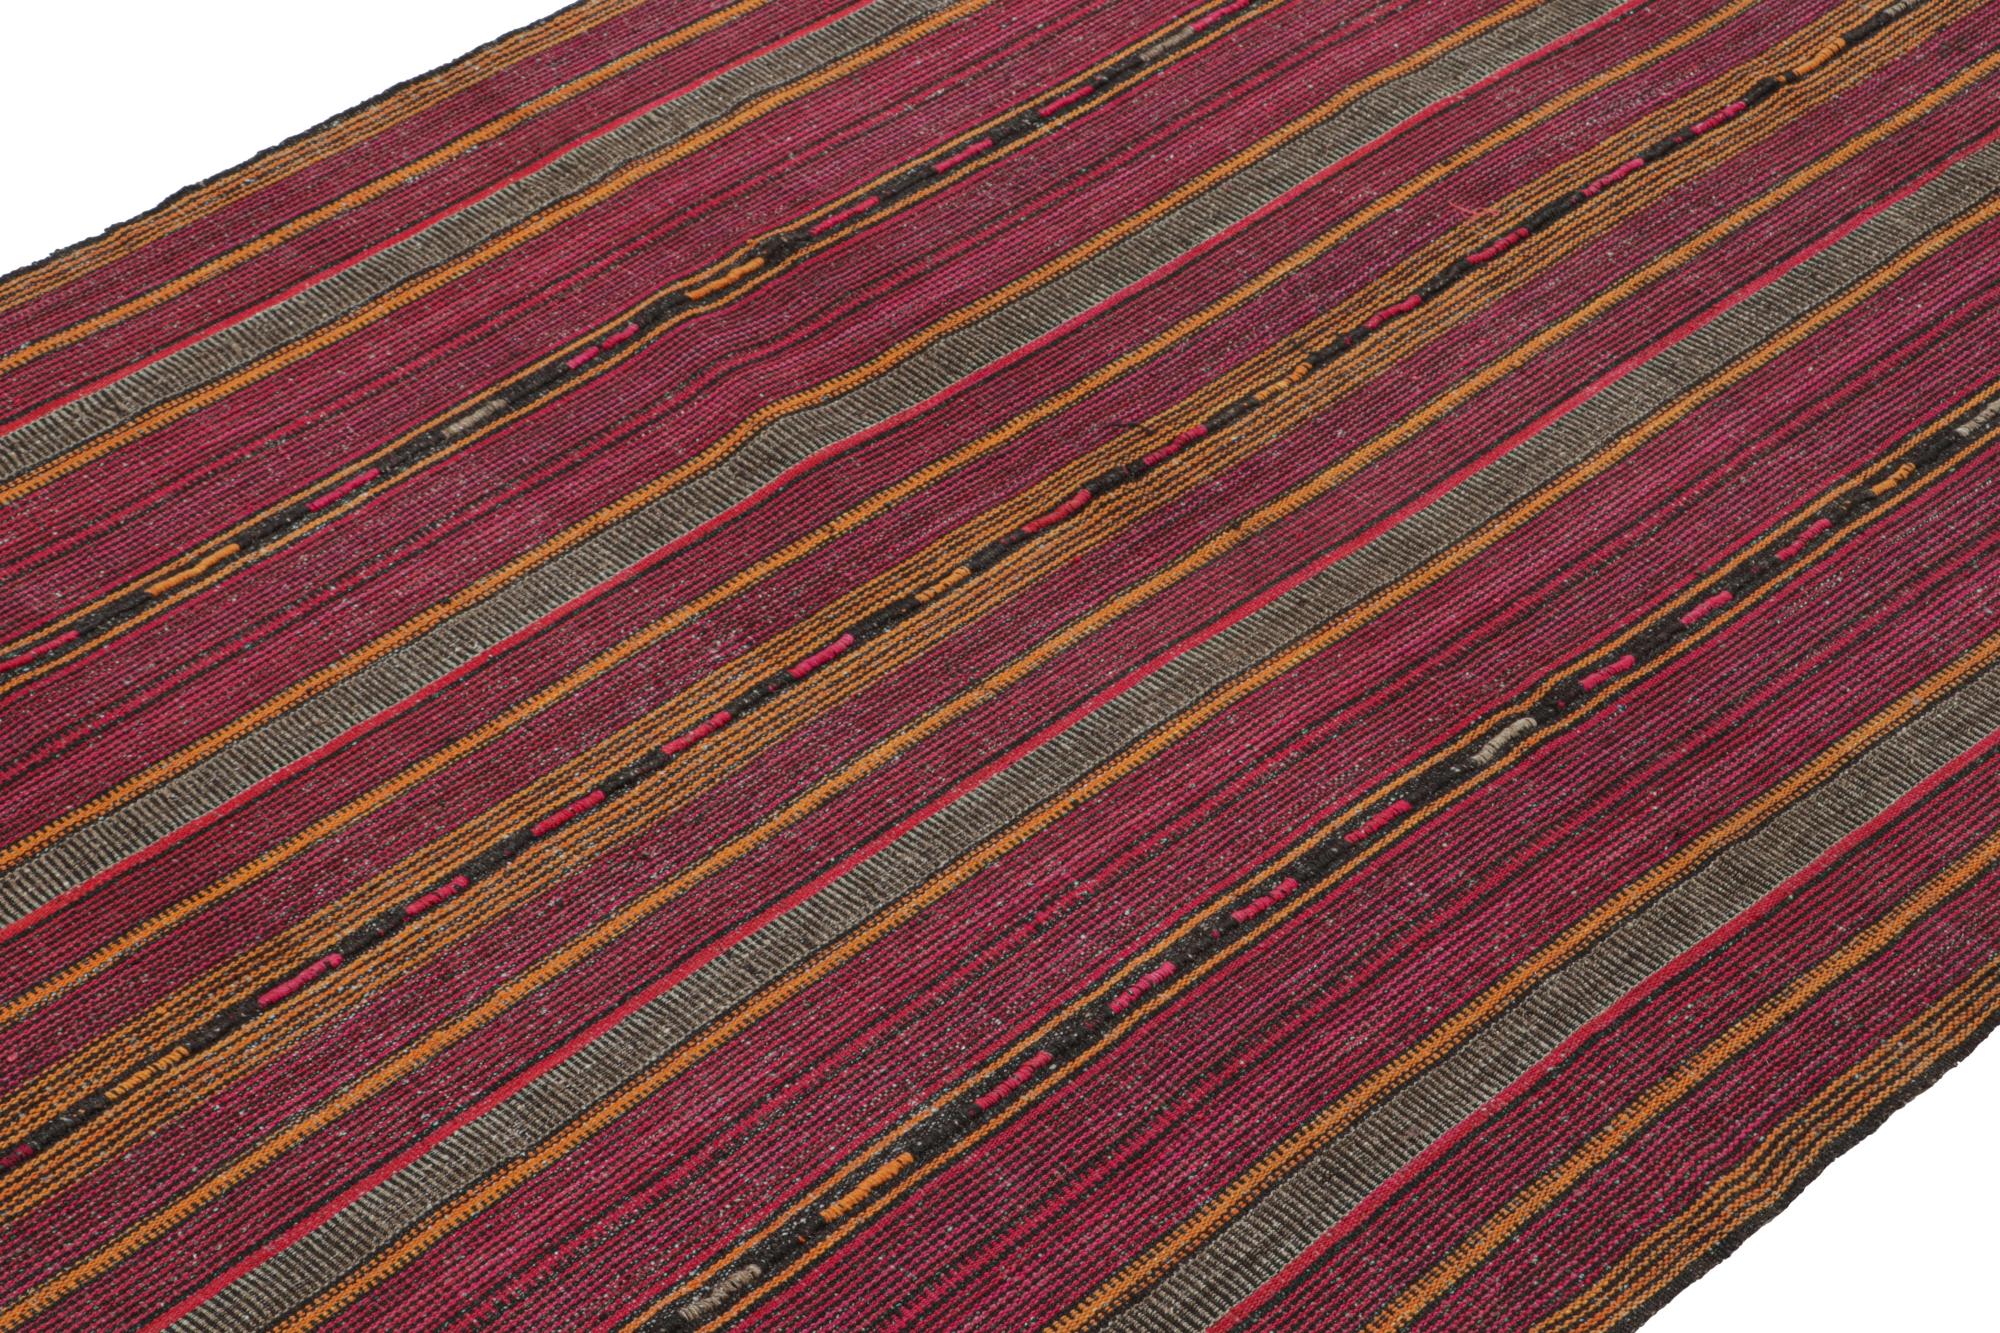 Handwoven in wool circa 1950-1960, this vintage 6x11 Persian Kilim from Kurdistan employs the distinct “palas” weaving technique. 

On The Design:

This pattern enjoys an interesting play of vibrant and rich tones of pink, ochre and other hues